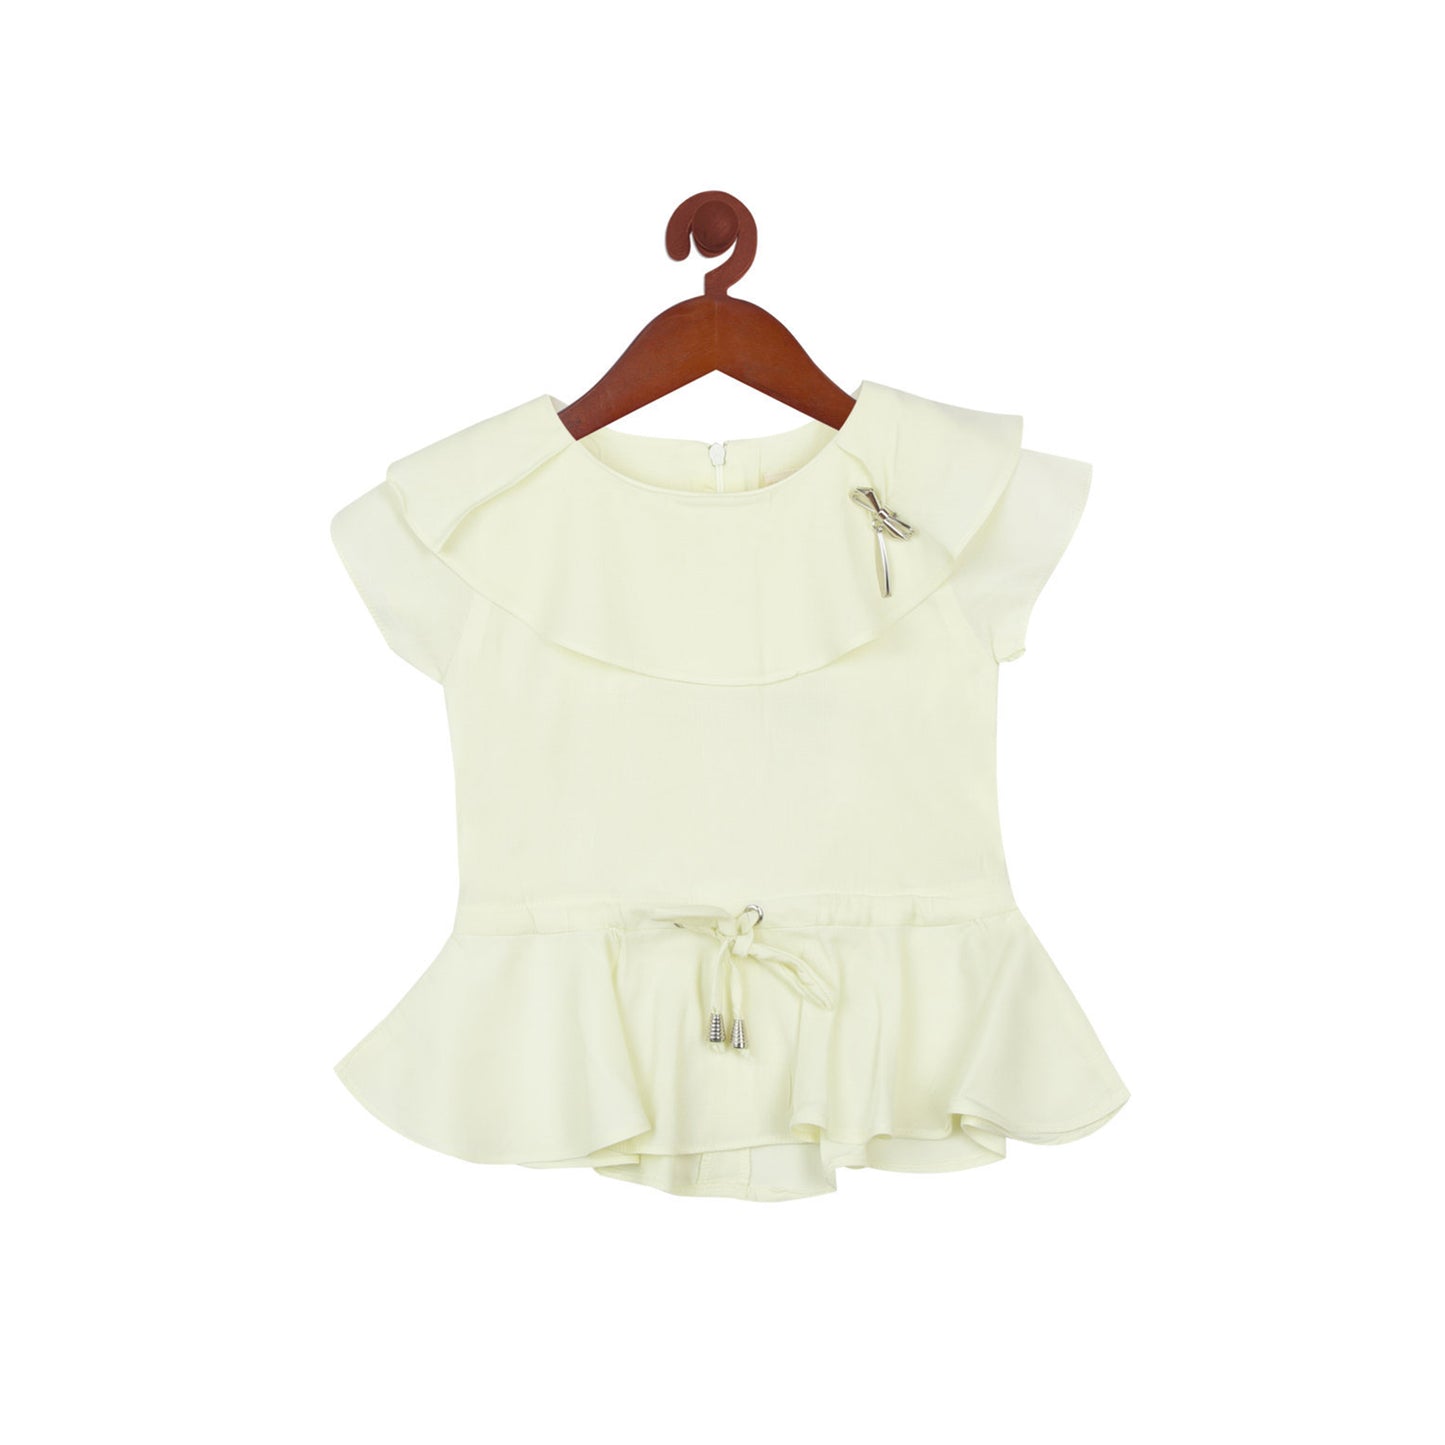 Peplum Lemon Top With Ruffle Neck And Tiny Bow Detailing